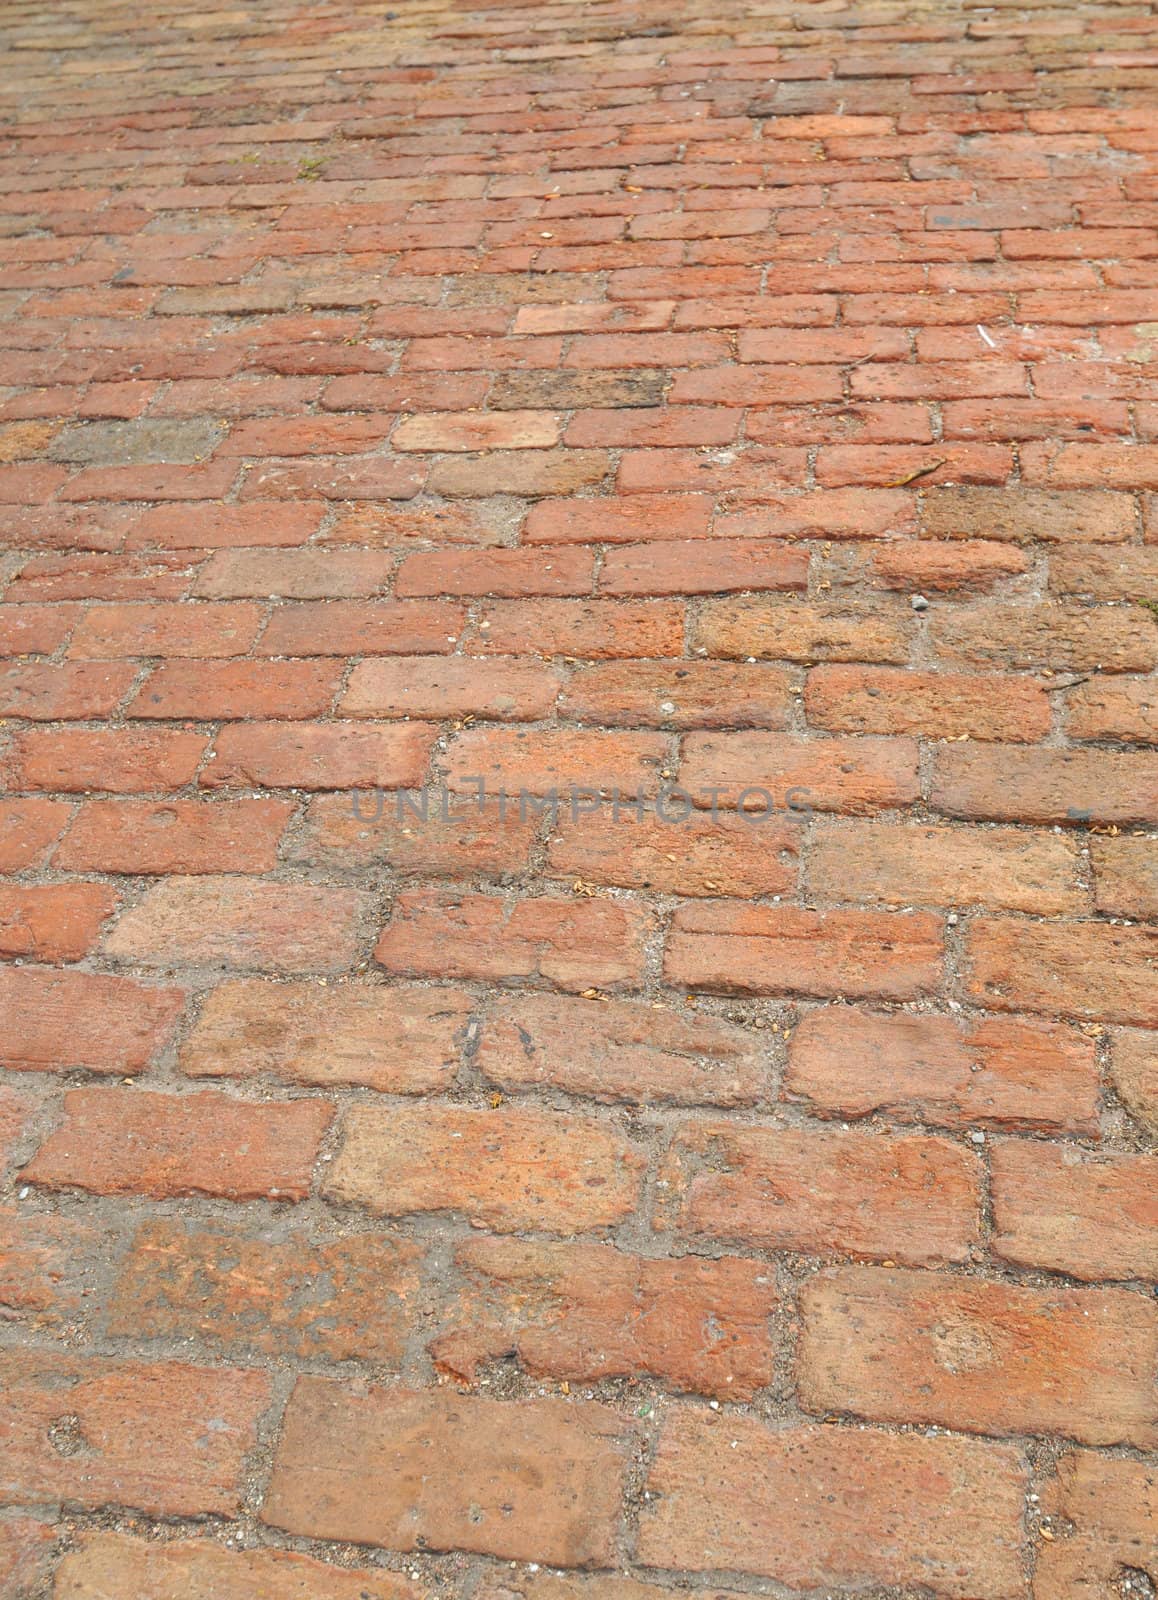 brick road or brick wall for textured background